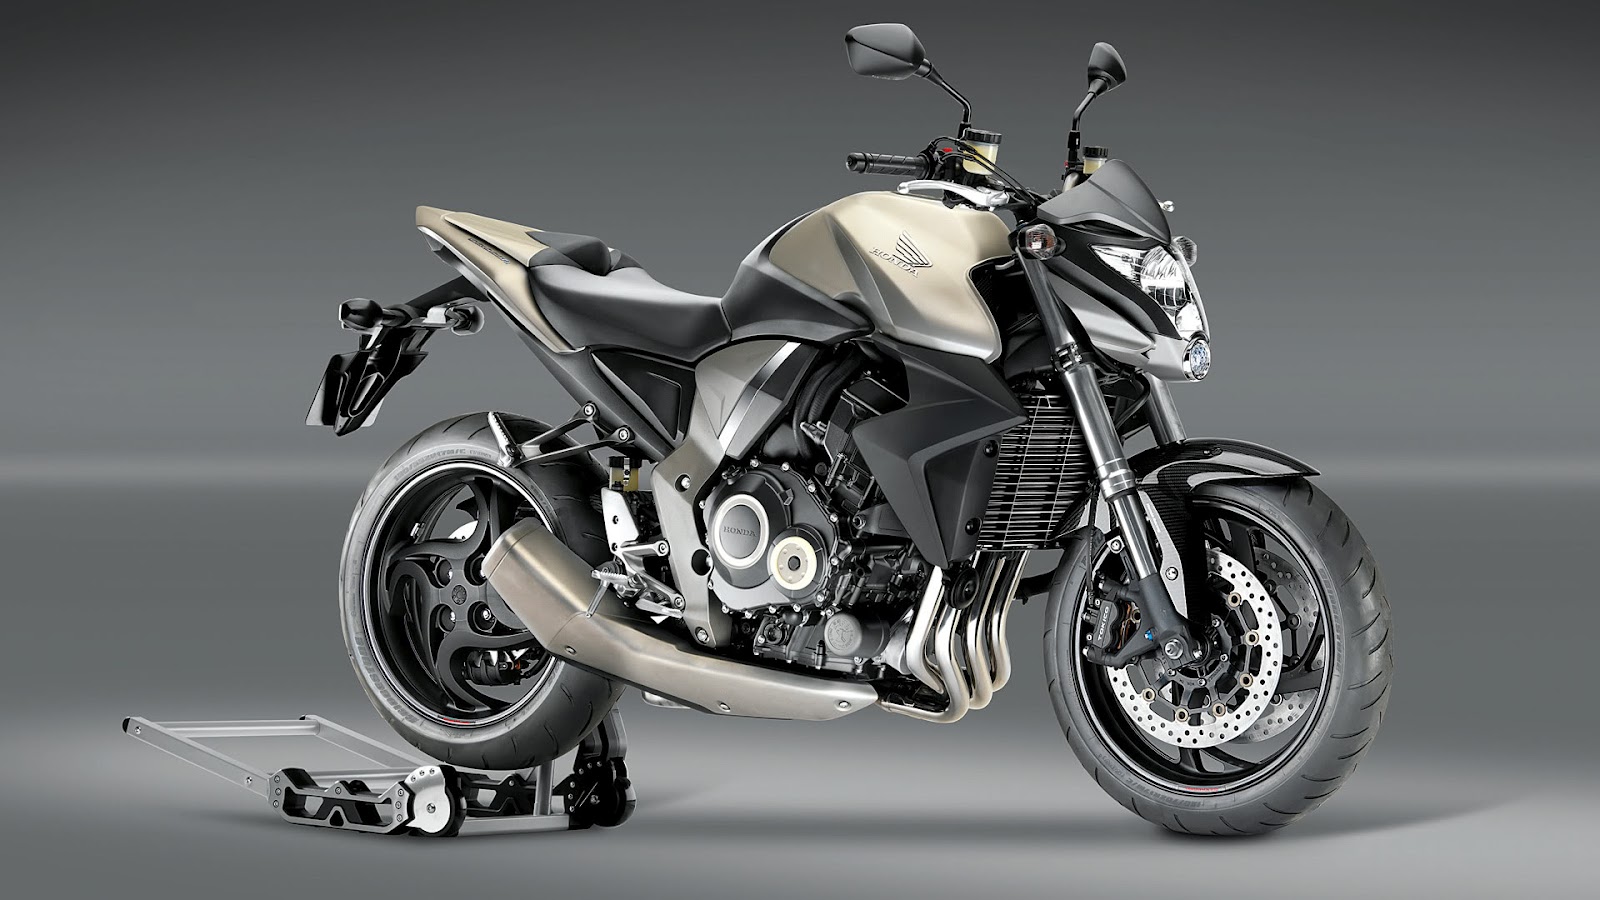 Honda CB1000R Images Pictures And Photos Gallery ALL About Wallpaper